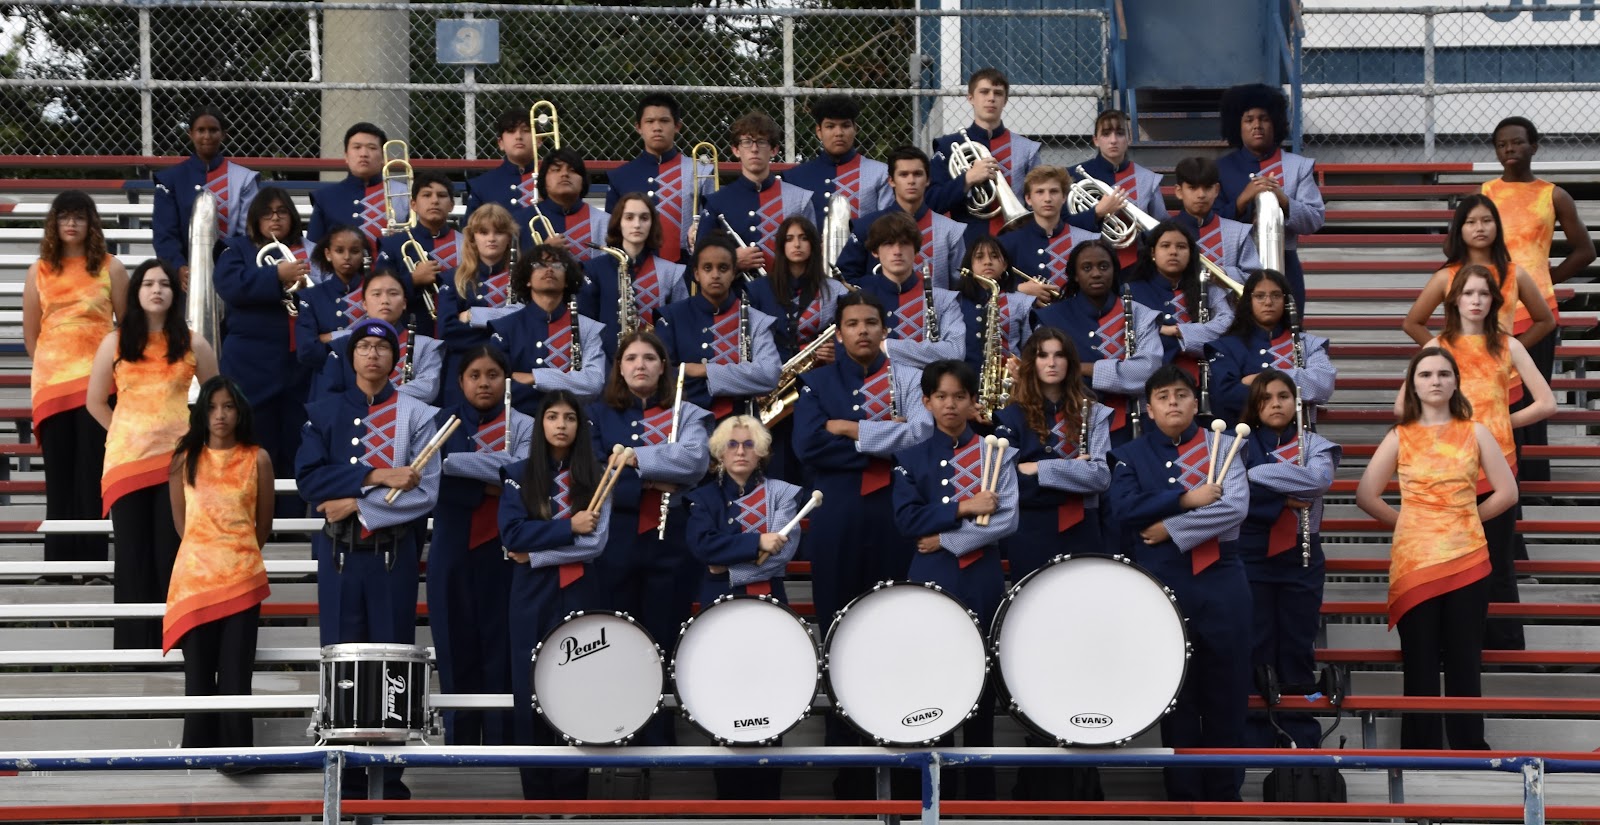 Justice High School Band Boosters